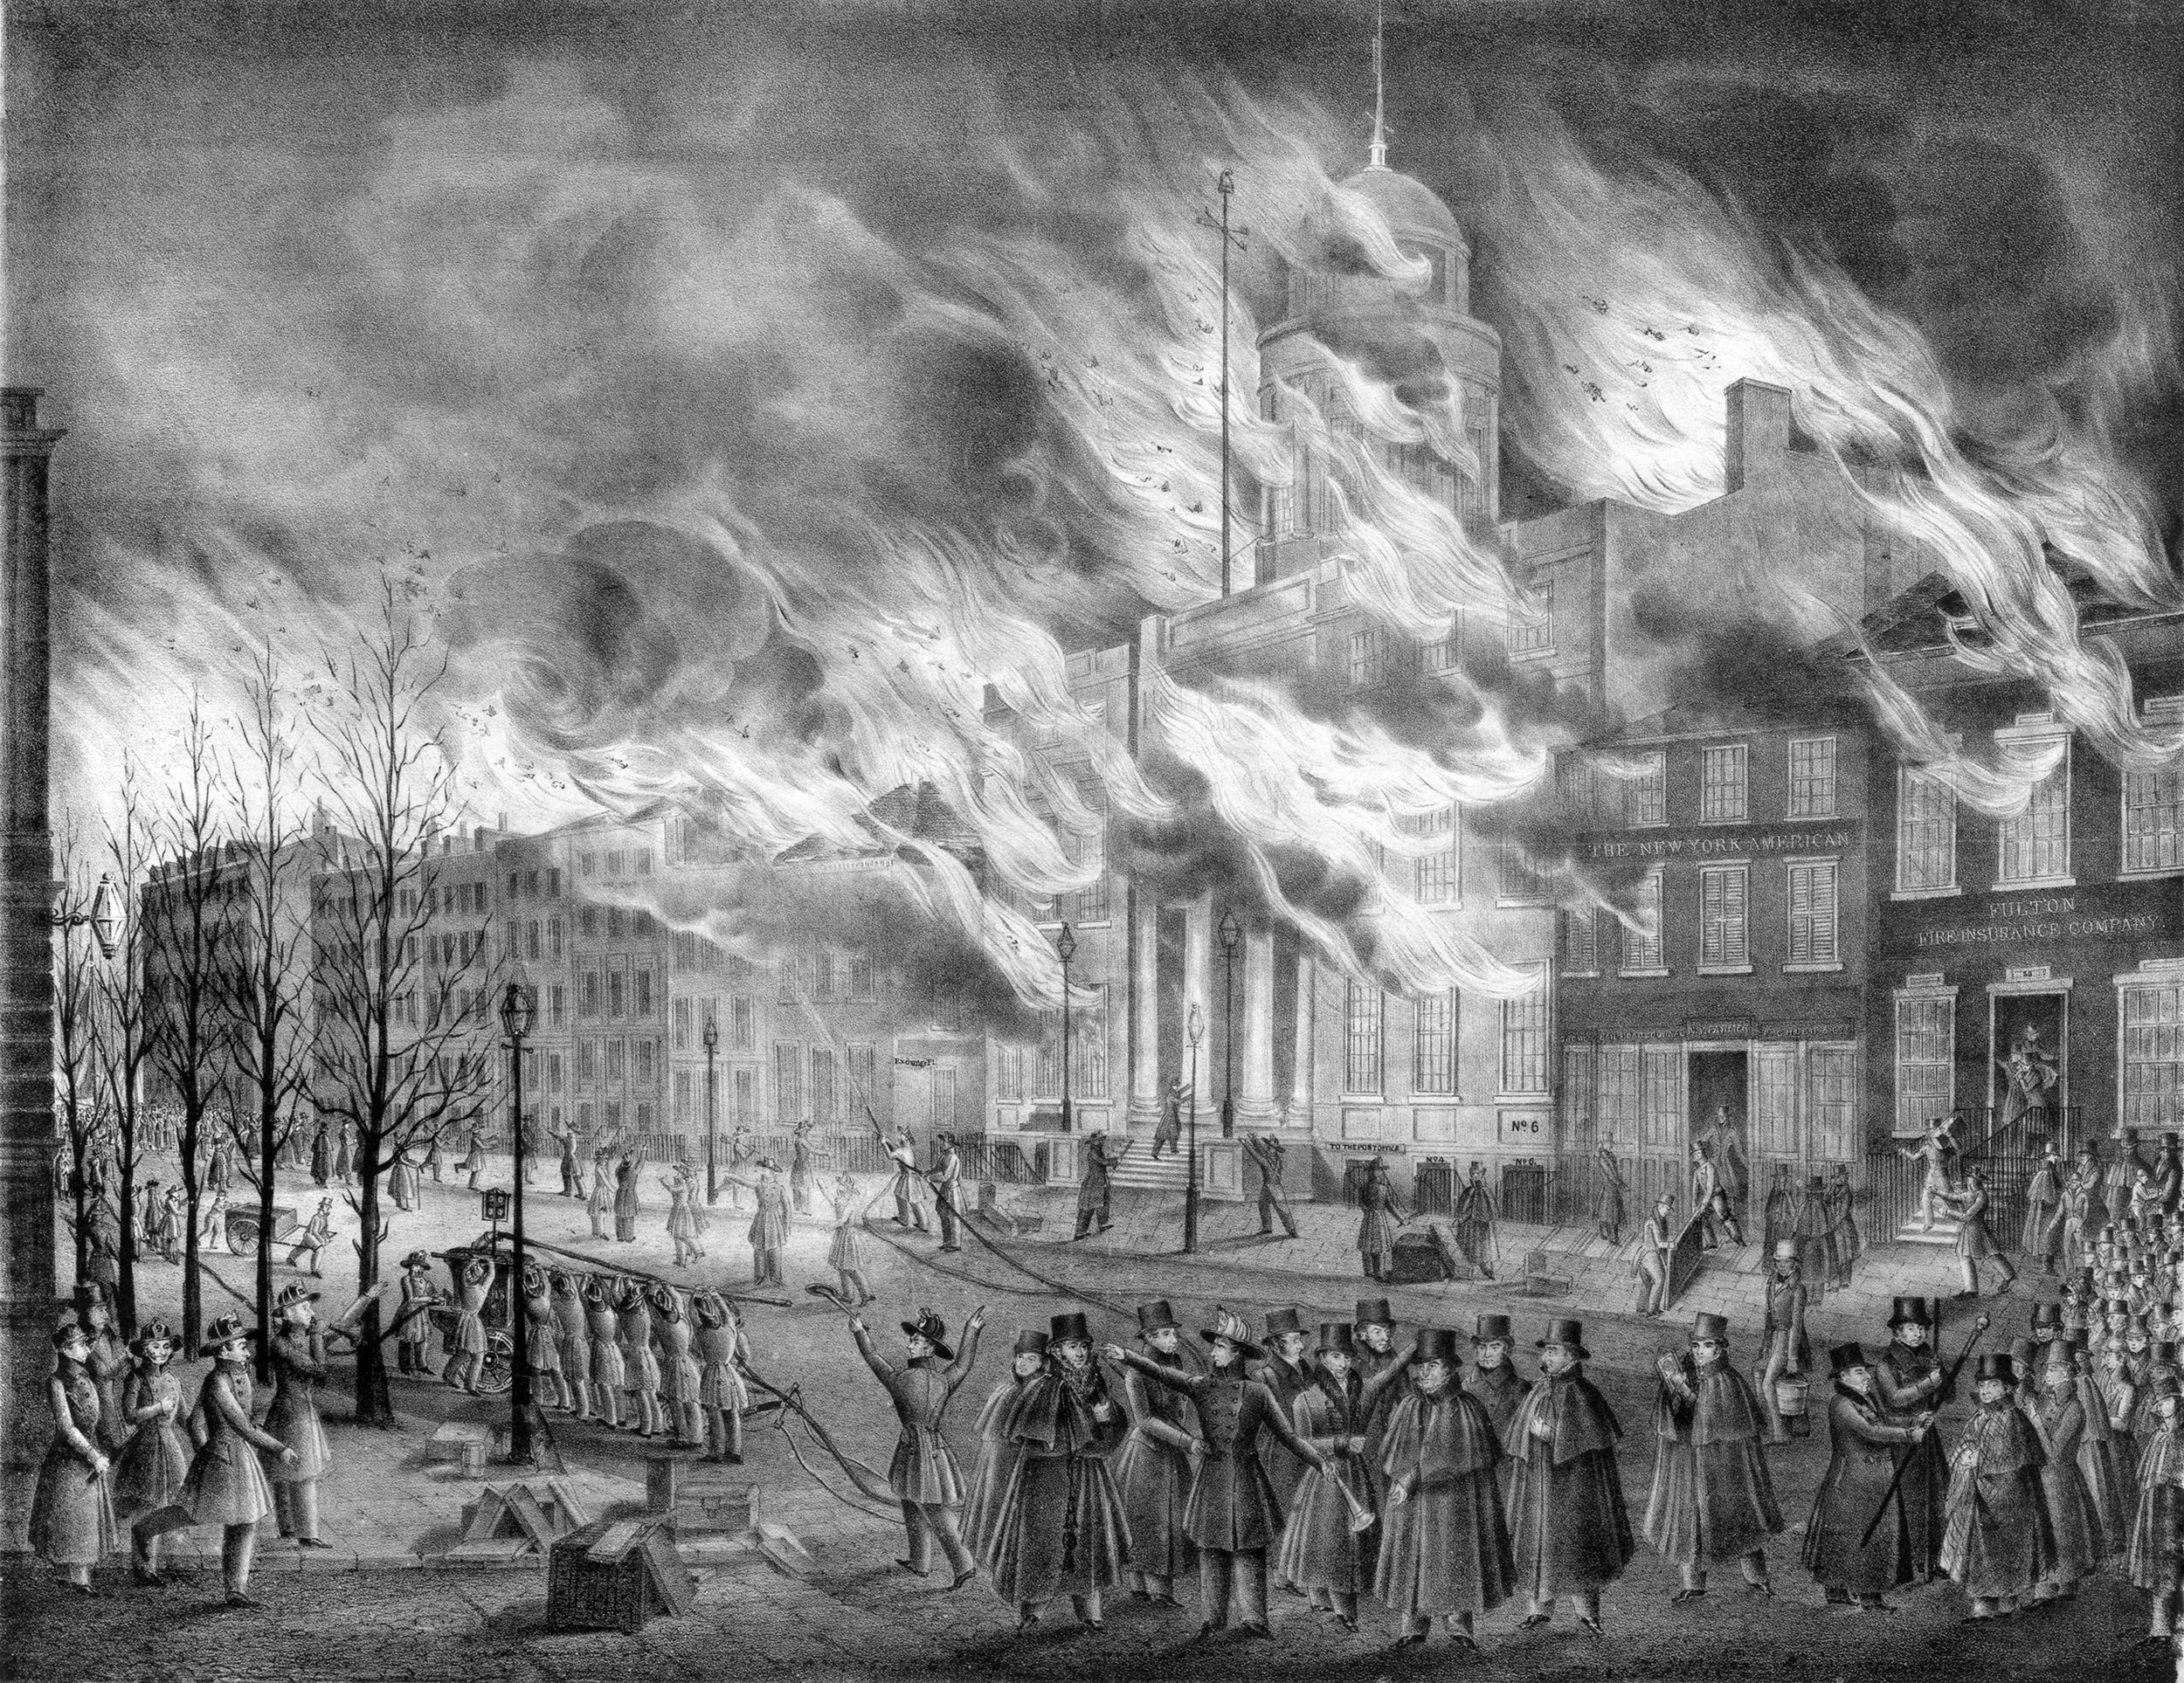 Lithograph of the Great Fire